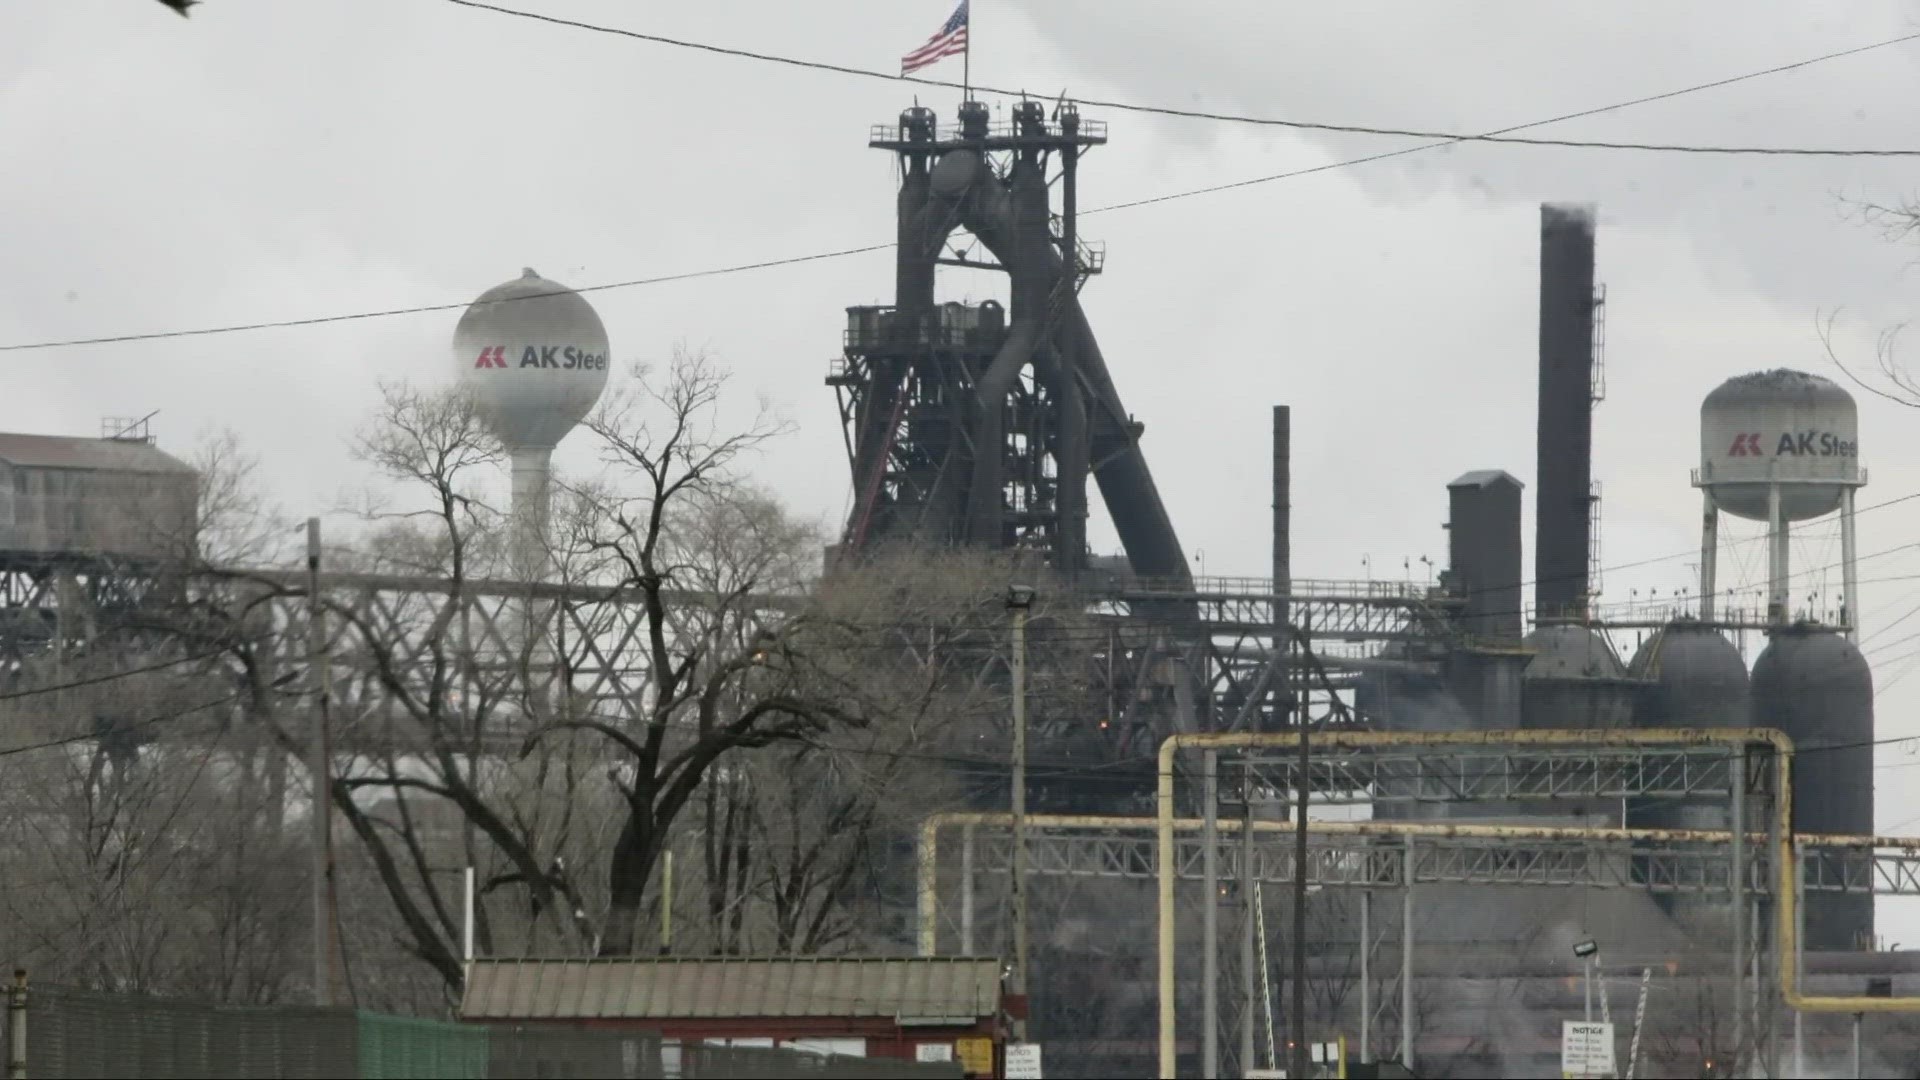 Cleveland Cliffs announced on Sunday that U.S. Steel has rejected their offer to buy the company.